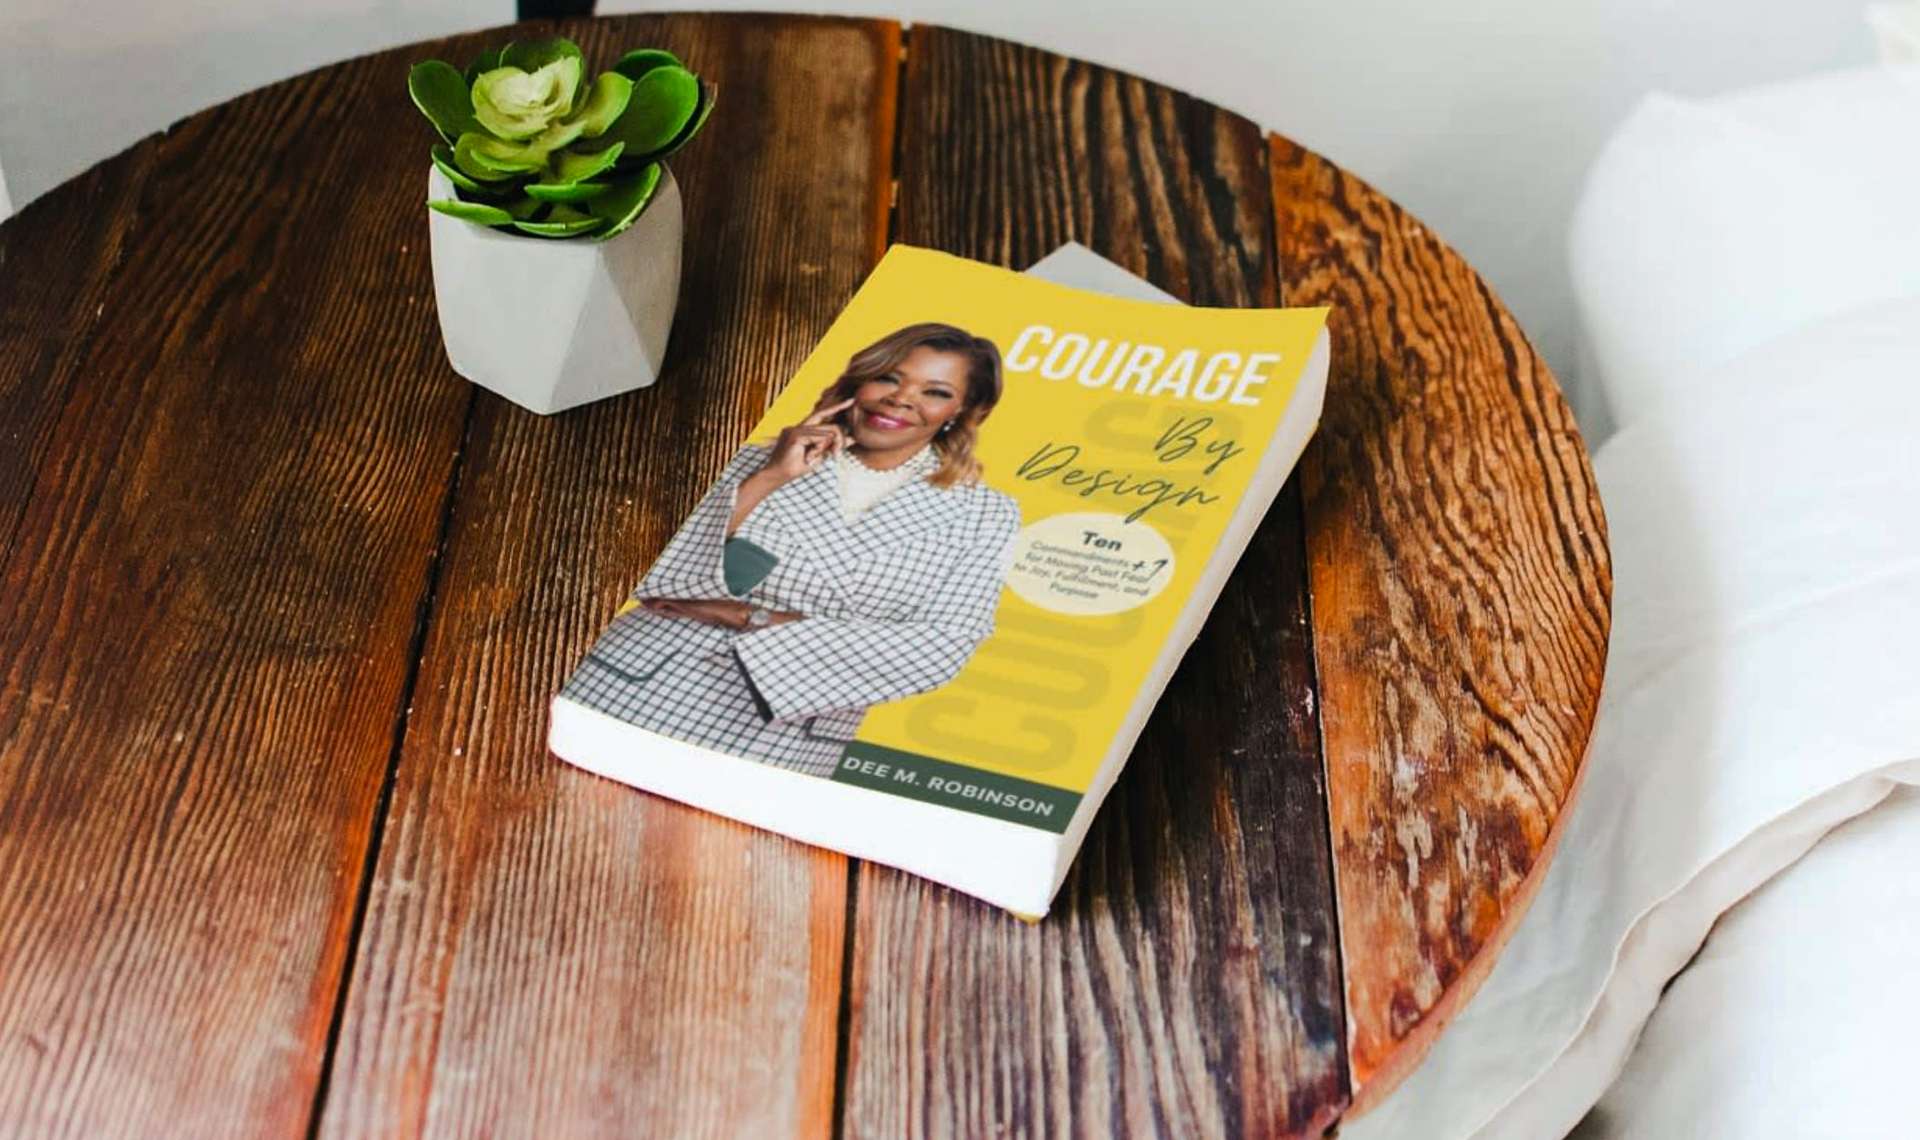 Order Courage by Design book